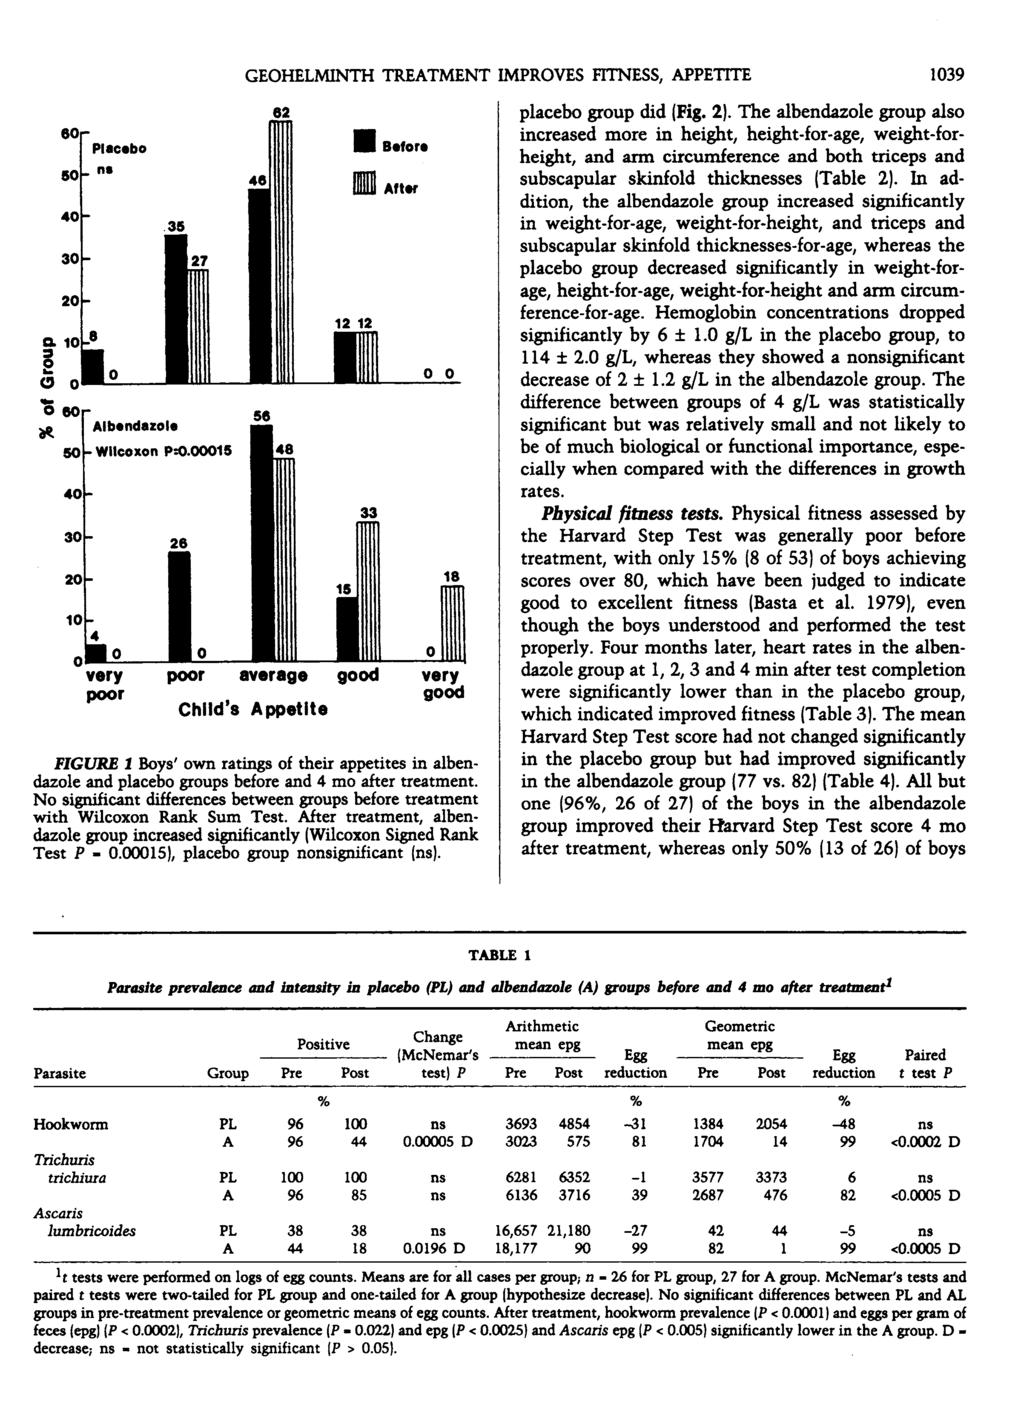 GEOHELMINTH TREATMENT IMPROVES FITNESS, APPETITE 1039 60r very poor average good very poor Child's Appetite good FIGURE 1 Boys' own ratings of their appetites in albendazole and placebo groups before